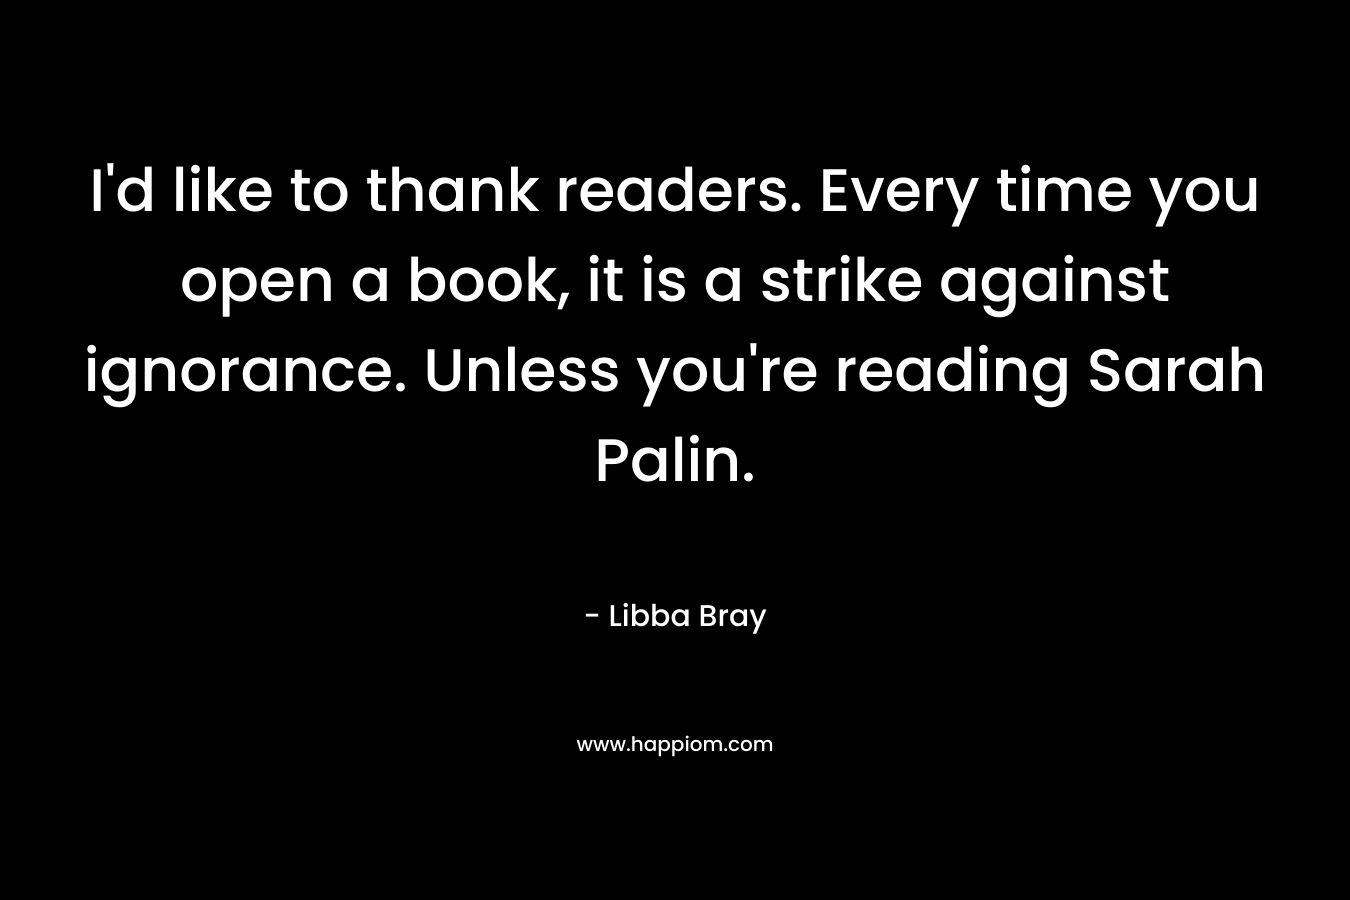 I'd like to thank readers. Every time you open a book, it is a strike against ignorance. Unless you're reading Sarah Palin.